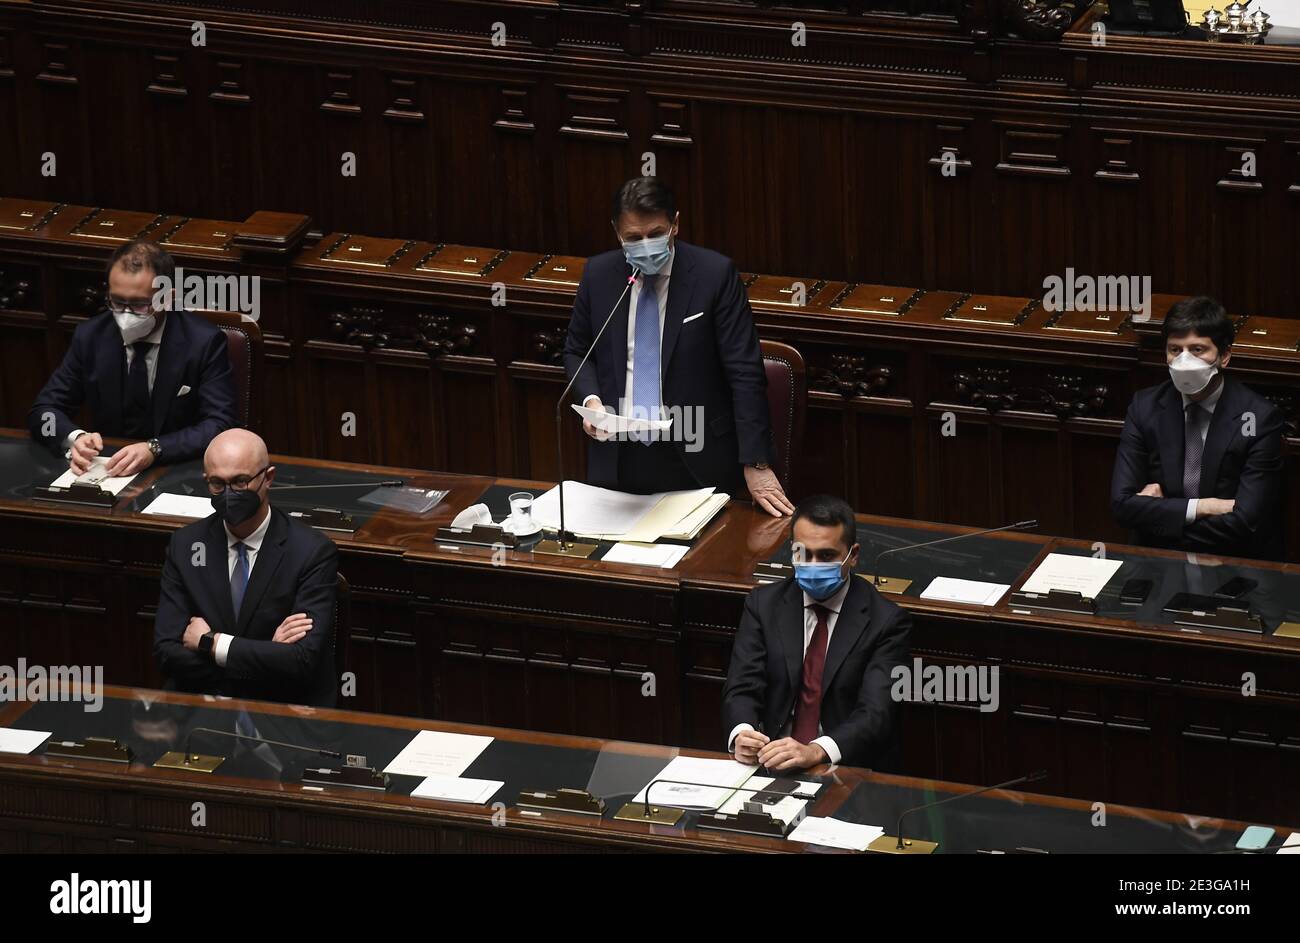 Rome. 19th Jan, 2021. Italian Prime Minister Giuseppe Conte (C) addresses the lower house of Parliament in Rome, Italy, on Jan. 18, 2021. Italian Prime Minister Giuseppe Conte won a confidence vote at the Lower House of Parliament on Monday by 321 in favor, 259 against and 27 abstaining. Conte sought the confidence vote after former Prime Minister Matteo Renzi, now a senator who leads the Italia Viva party, pulled out of the ruling majority last week, sparking a government crisis. Credit: Xinhua/Alamy Live News Stock Photo